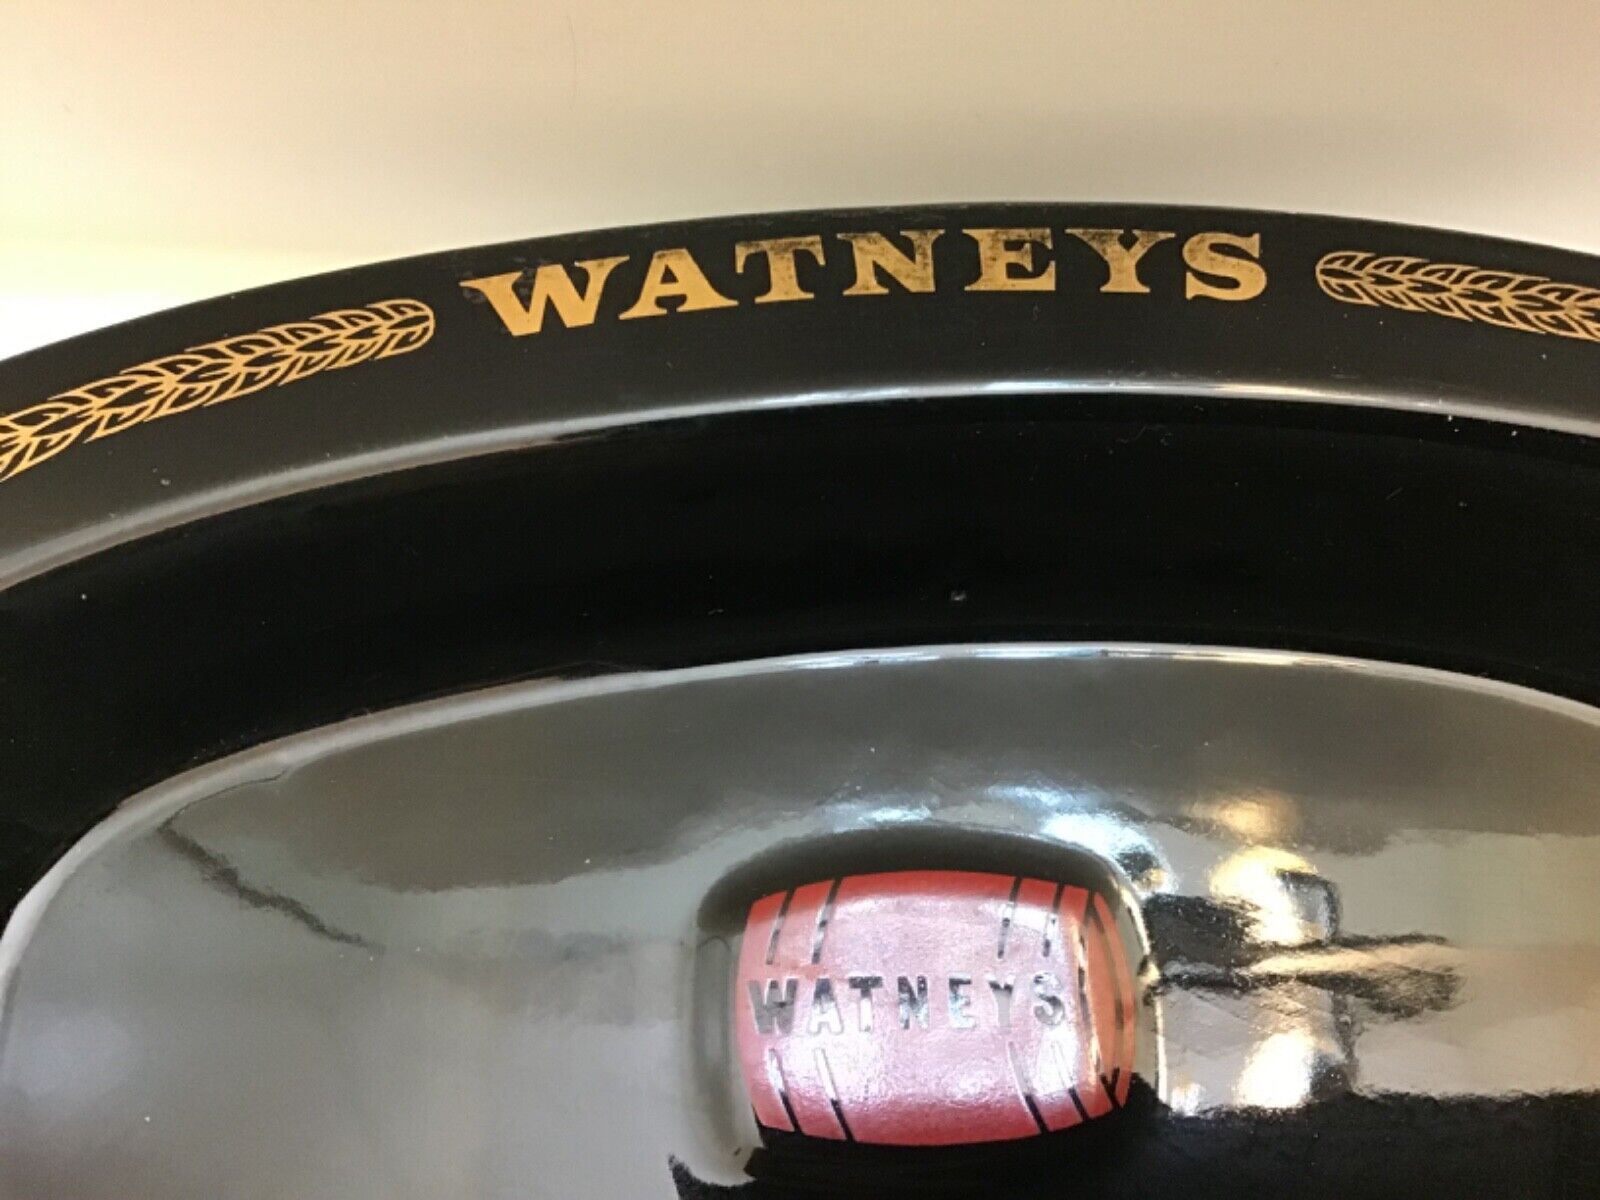 WATNEYS  Red Barrel Ceramic Ashtray Replica by Appointment to her Majesty Home C